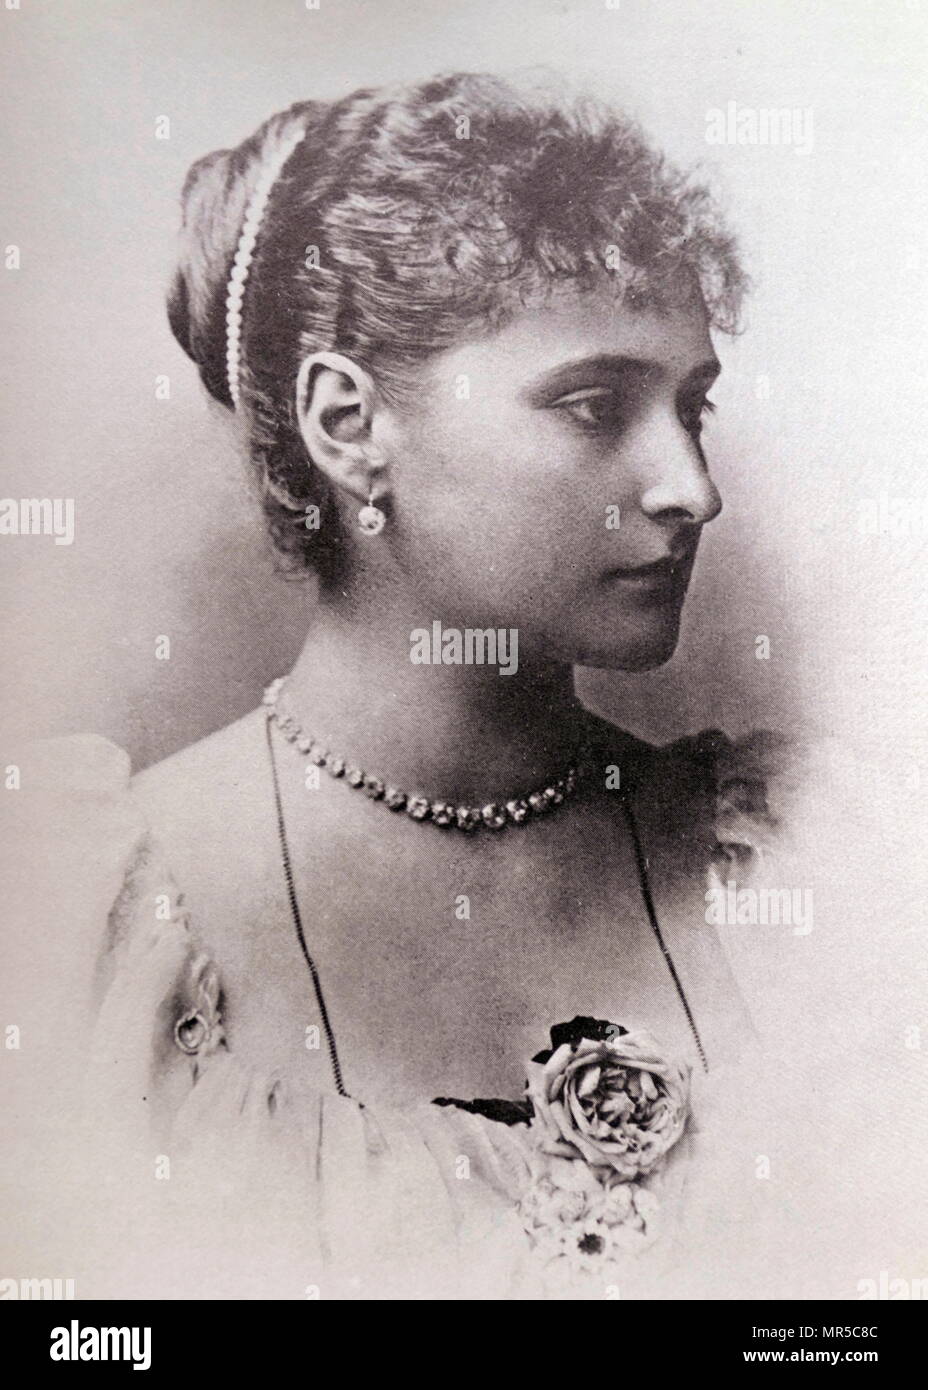 Photograph of Alexandra Feodorovna (1872 – 1918), Empress of Russia as the spouse of Nicholas II, the last ruler of the Russian Empire. Originally known as Alix of Hesse and by Rhine, she was a granddaughter of Queen Victoria of the United Kingdom. Dated 19th Century Stock Photo